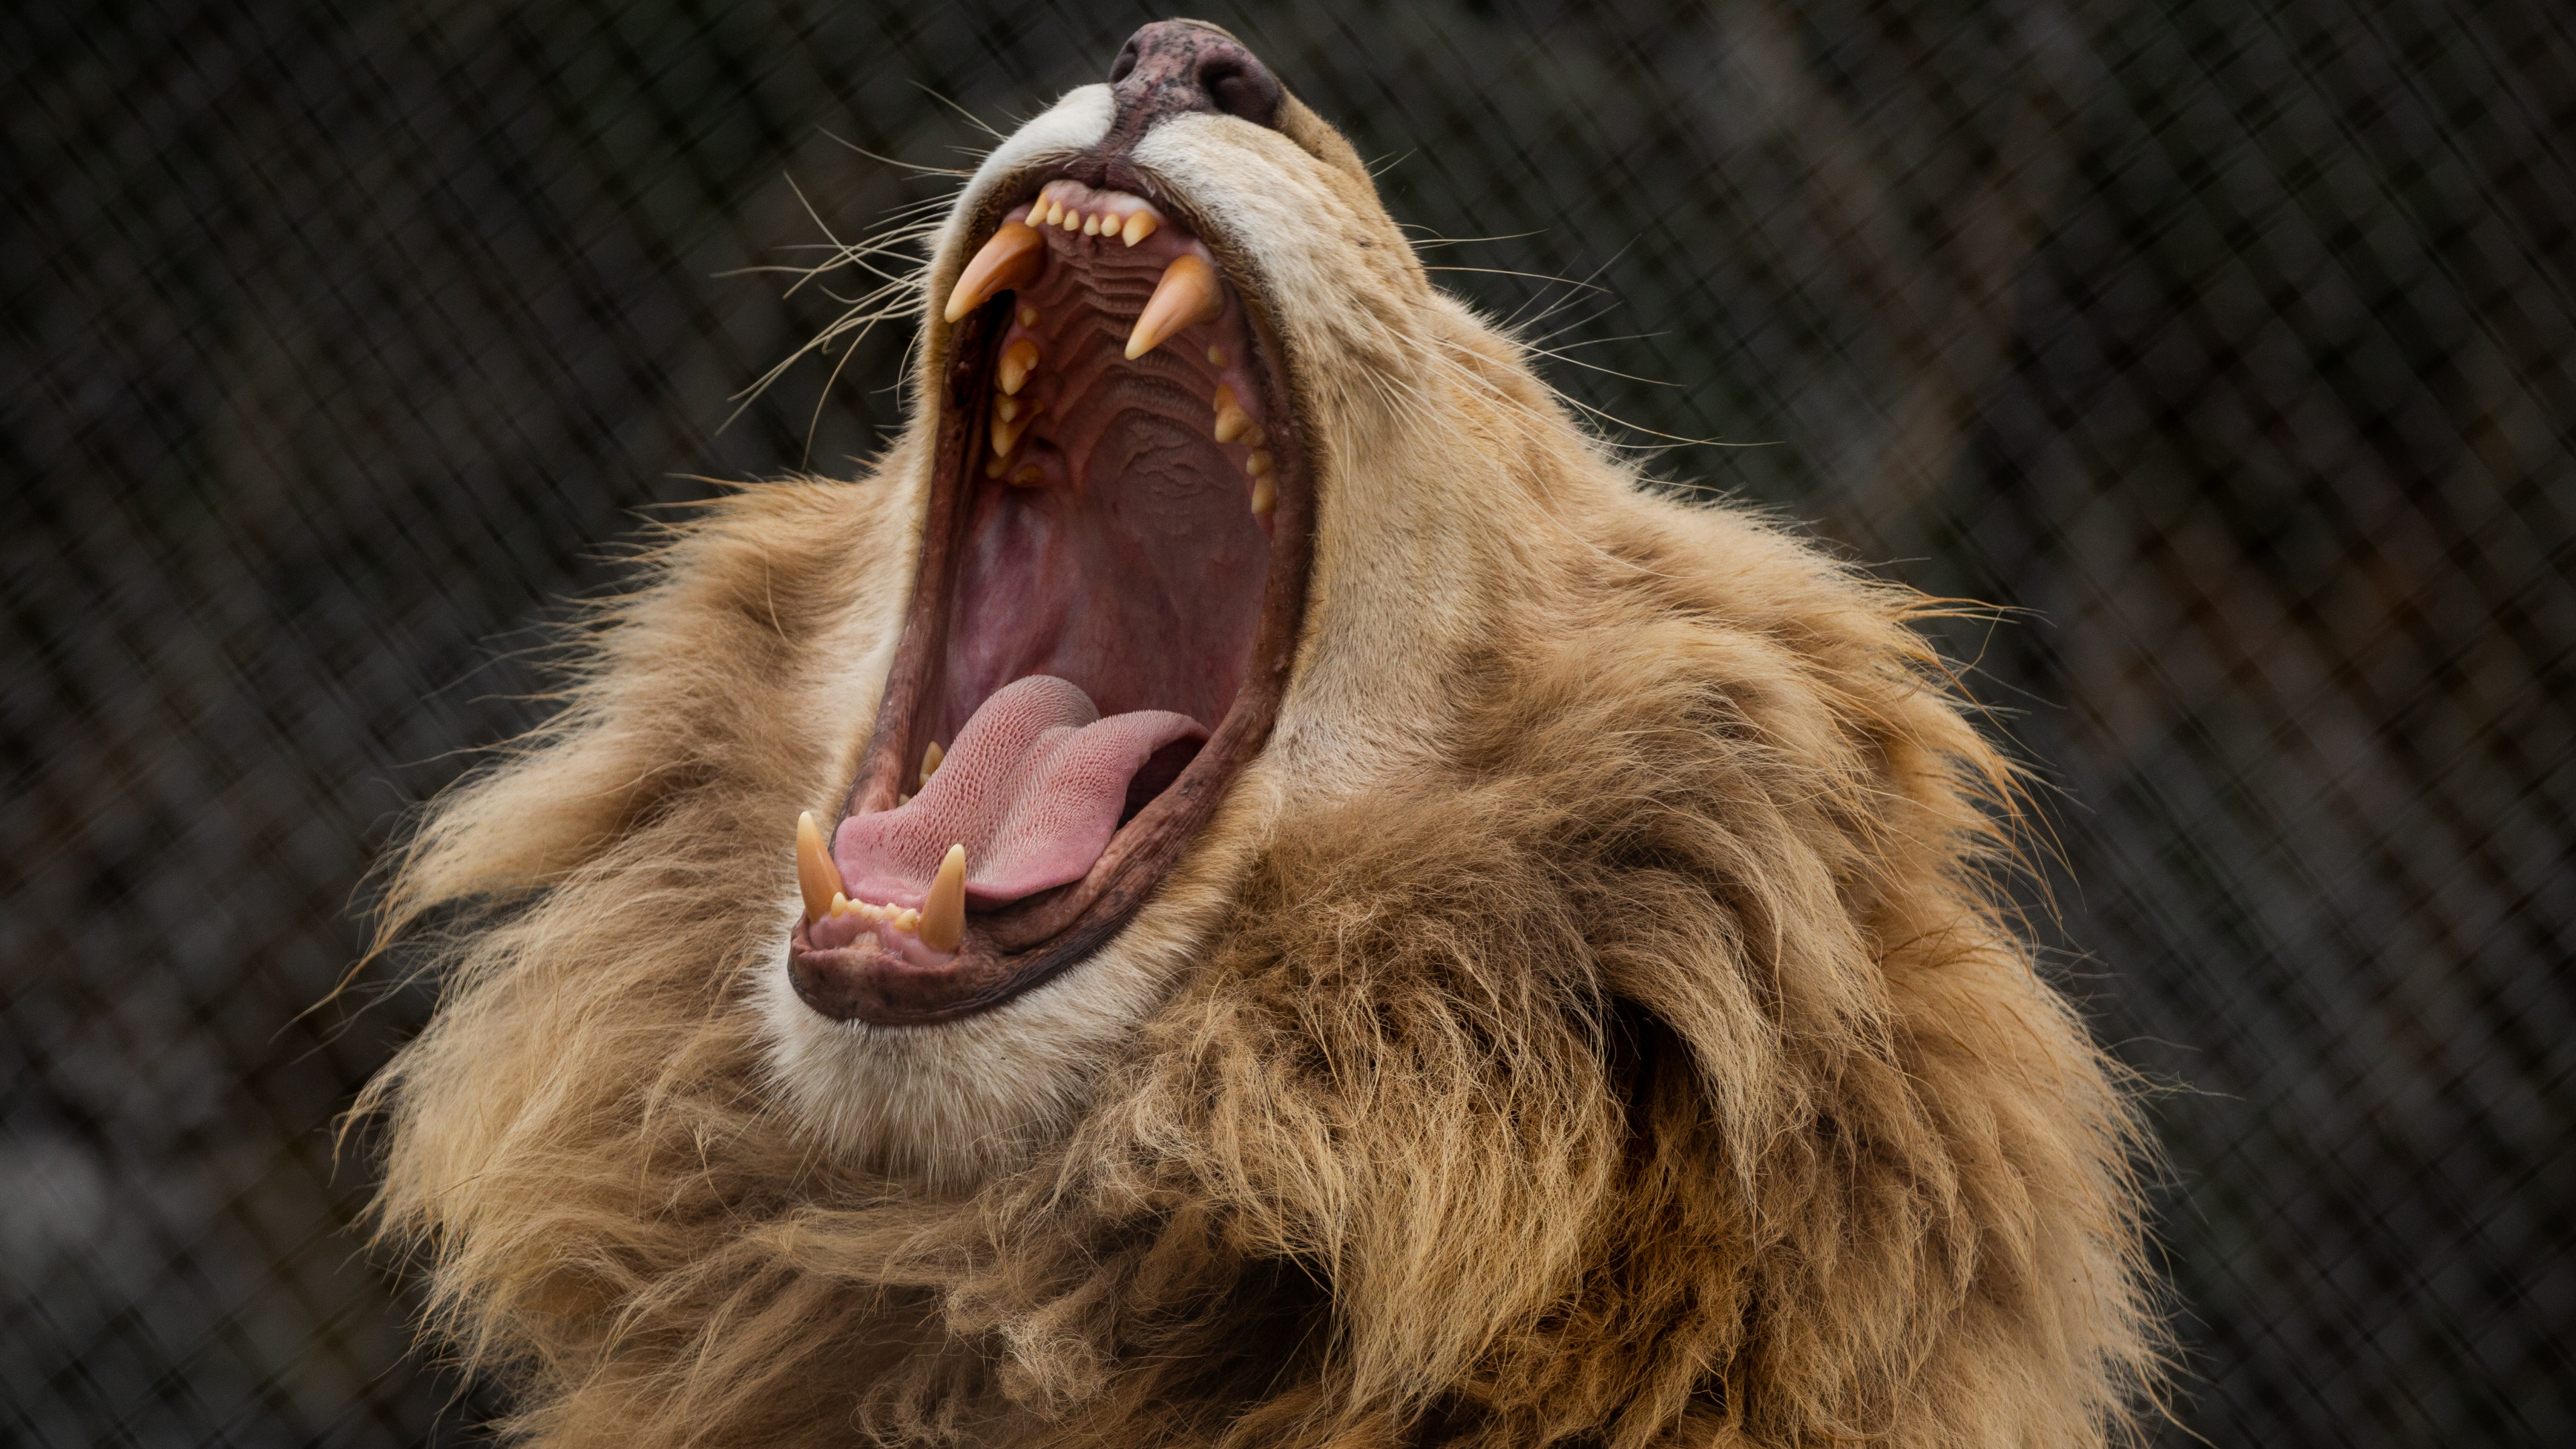 Brown Lion Showing Tongue During Daytime. Wallpaper in 3840x2160 Resolution